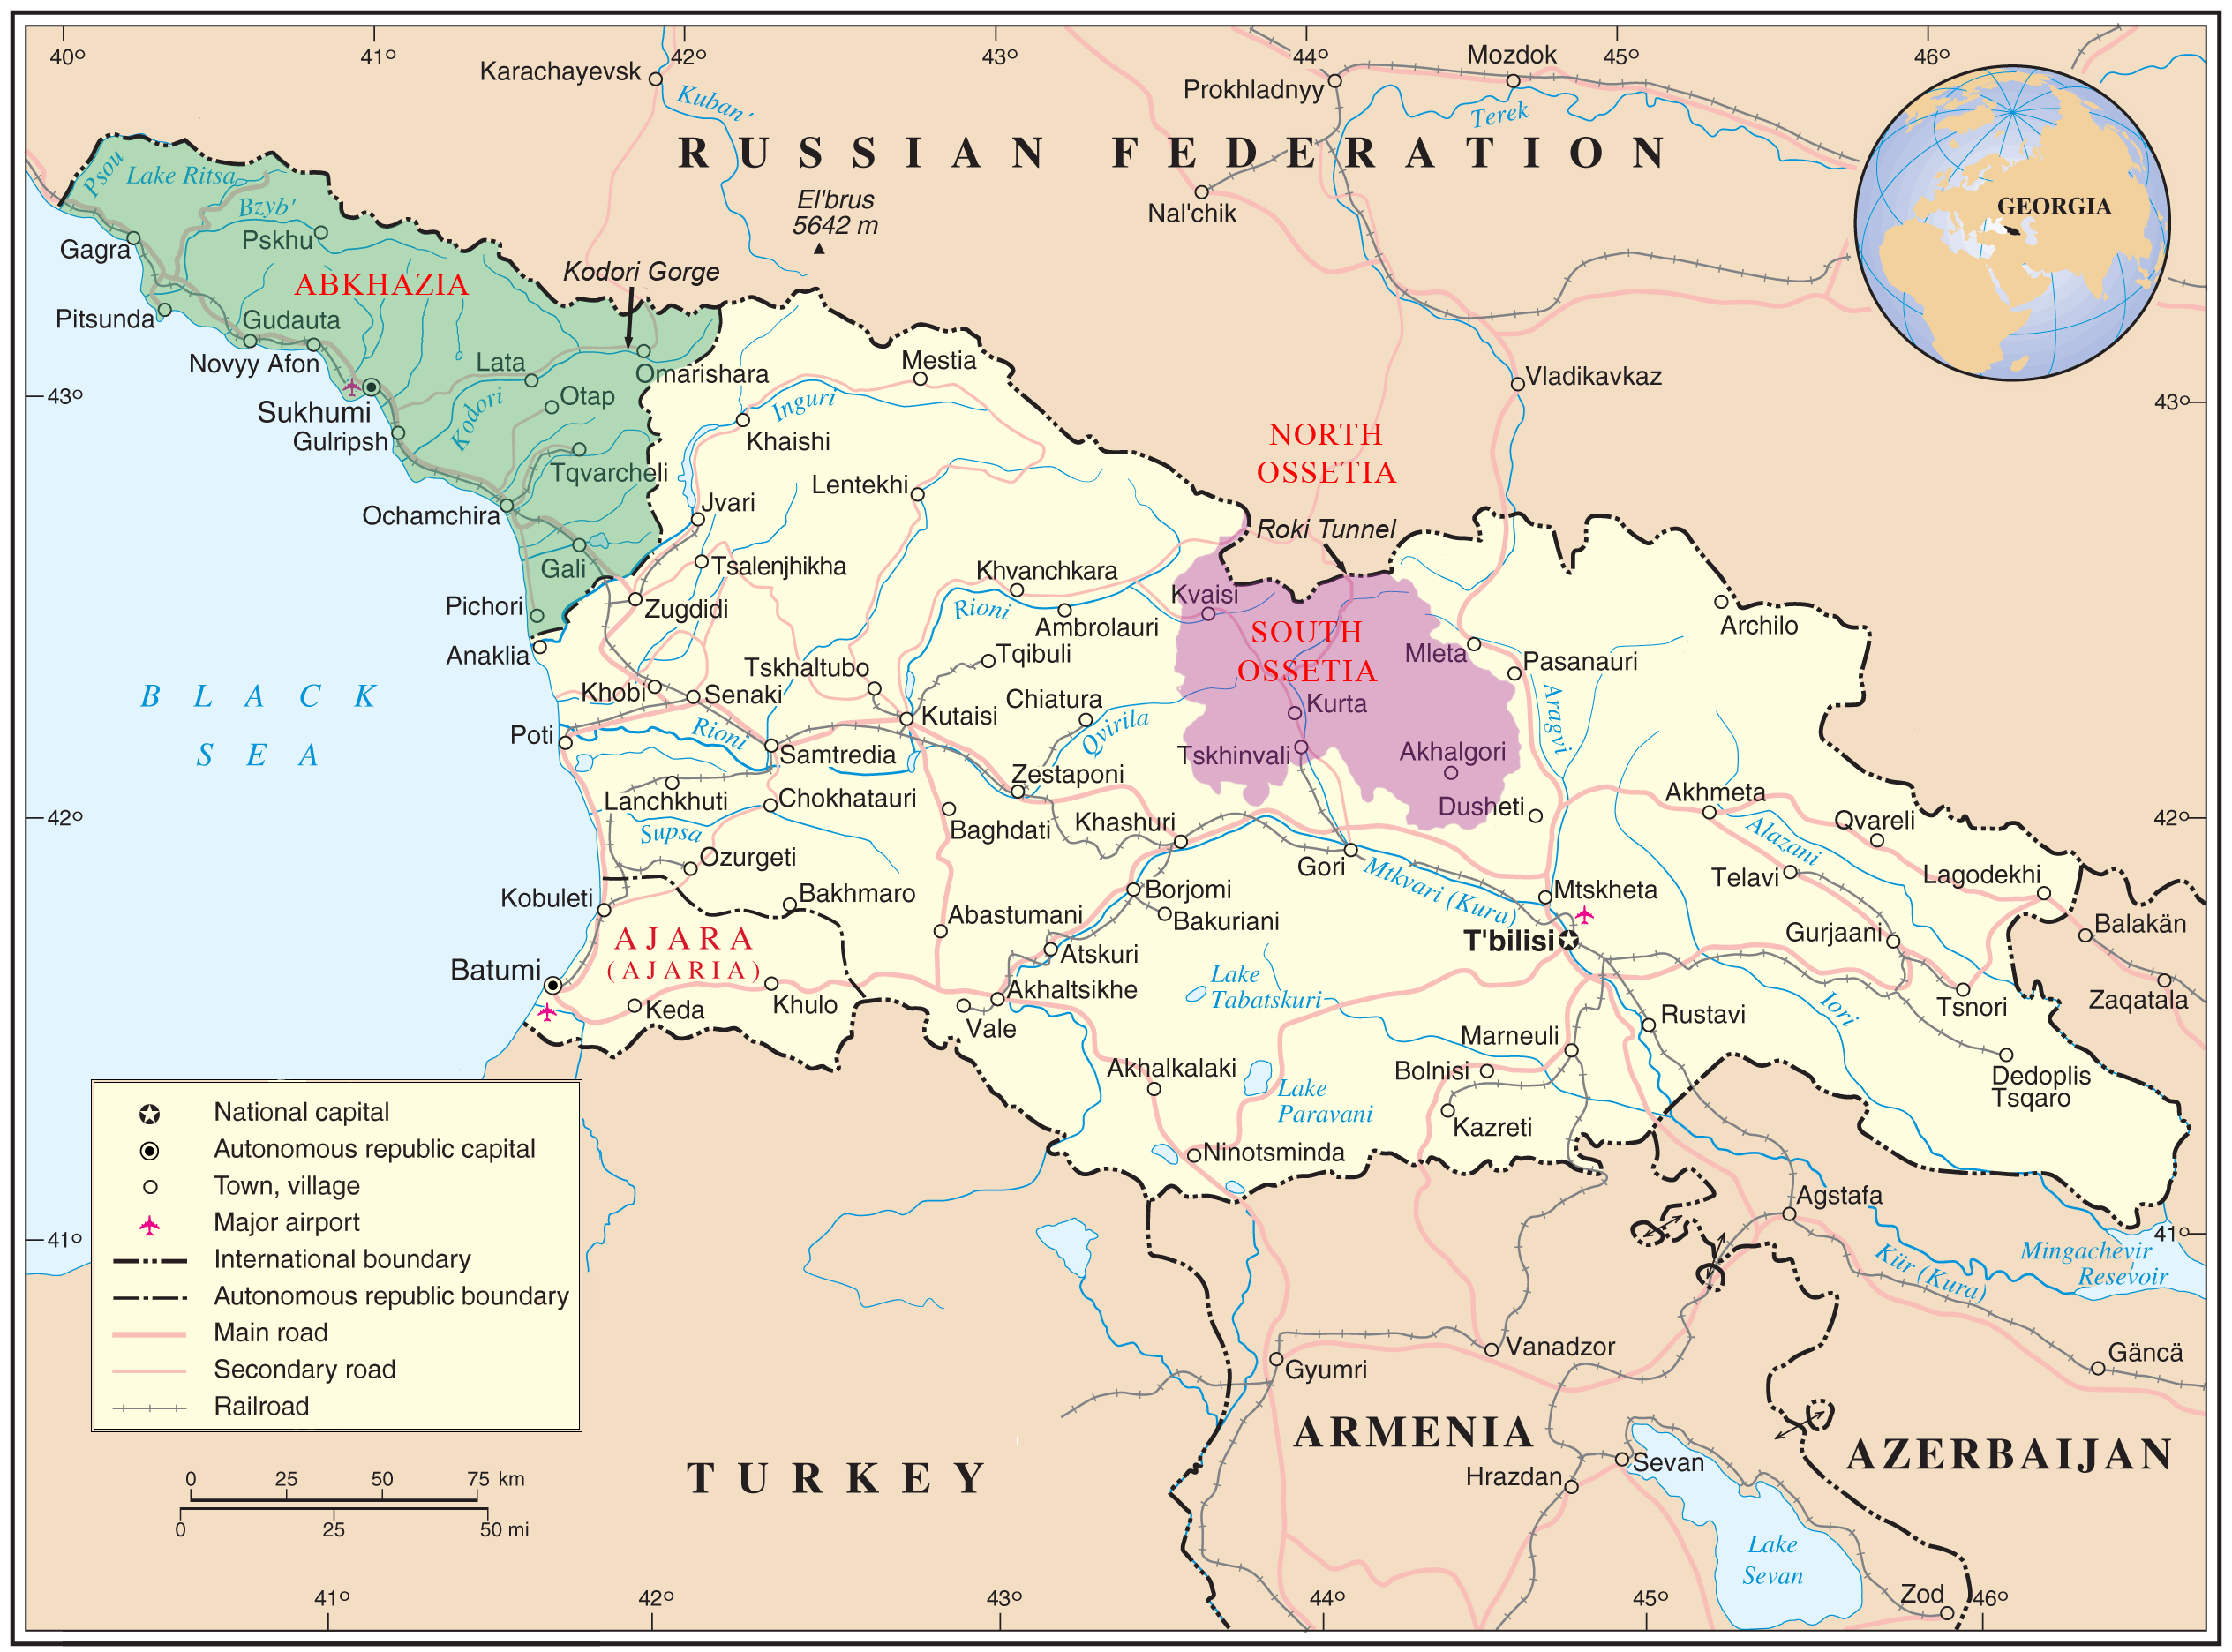 File:Flag-map of South Ossetia-Russia.svg - Wikipedia